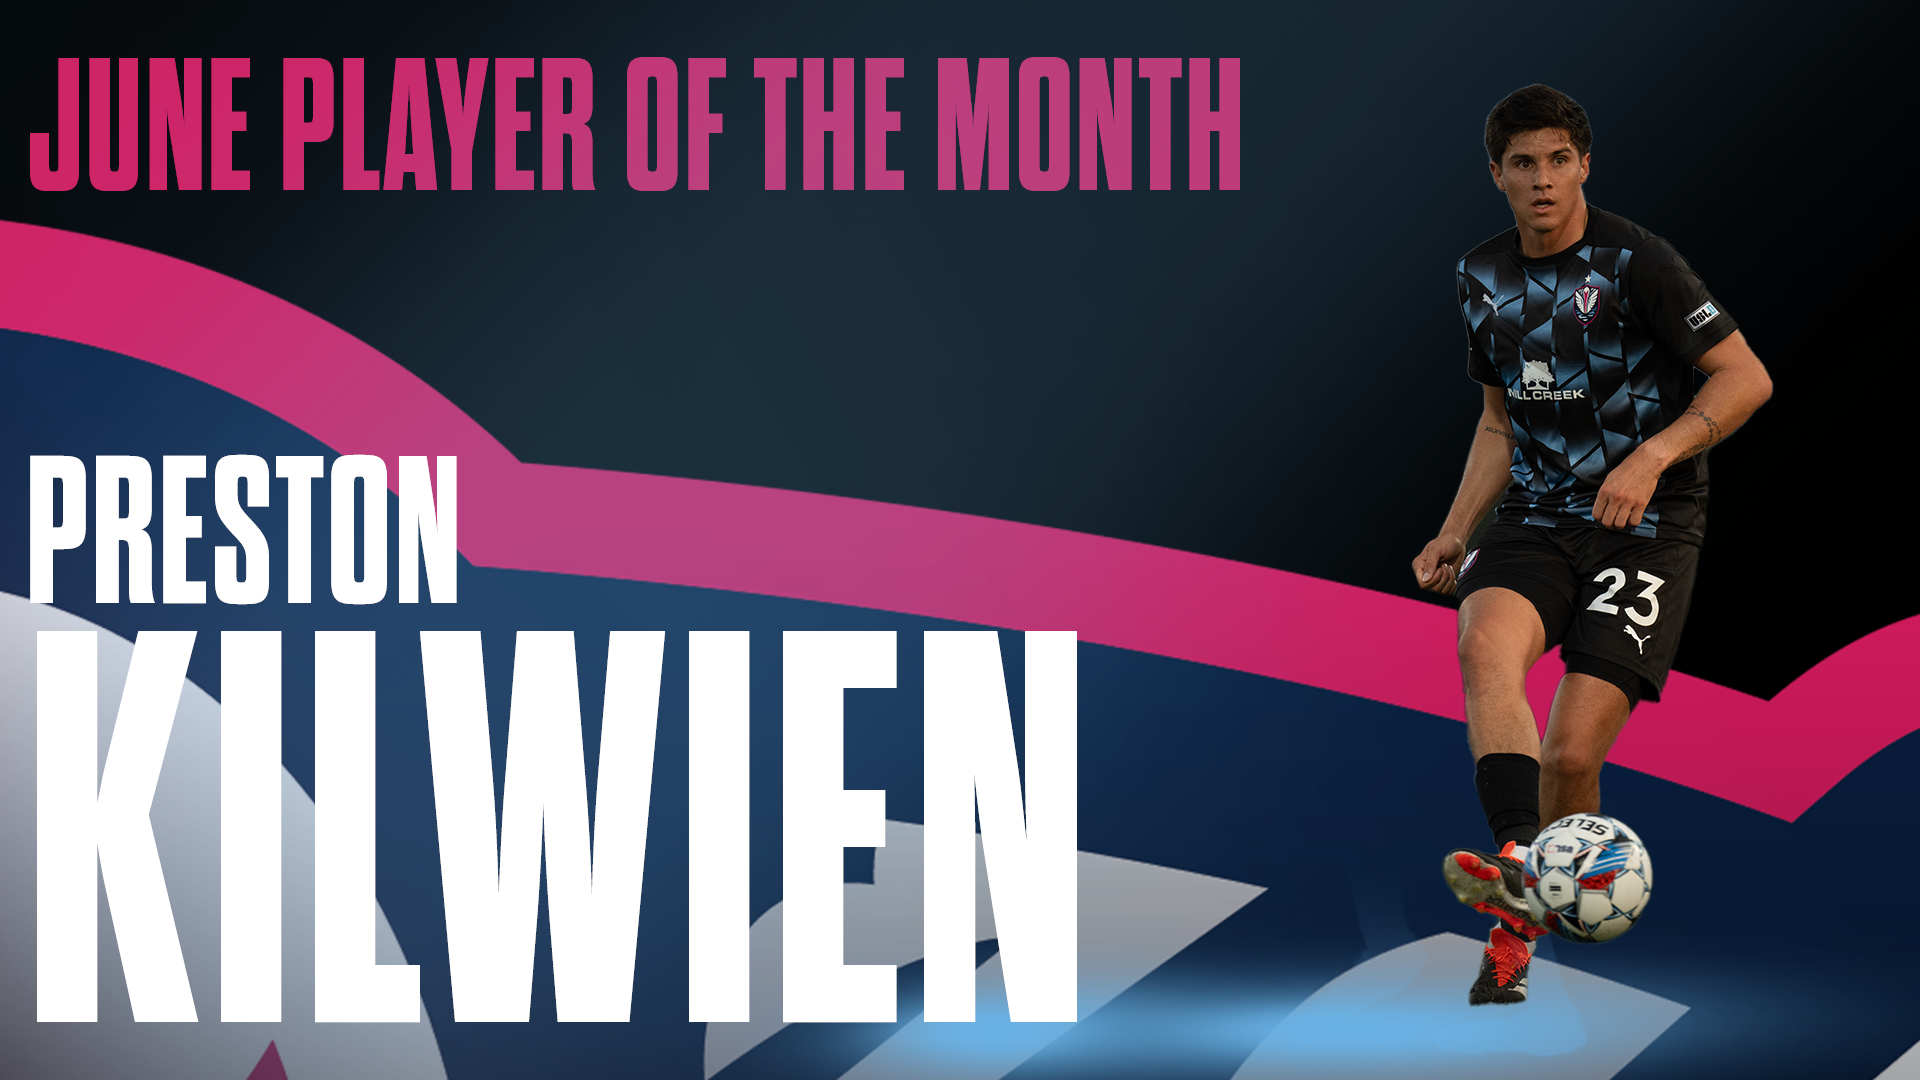 Preston Kilwien Wins June Player of the Month featured image